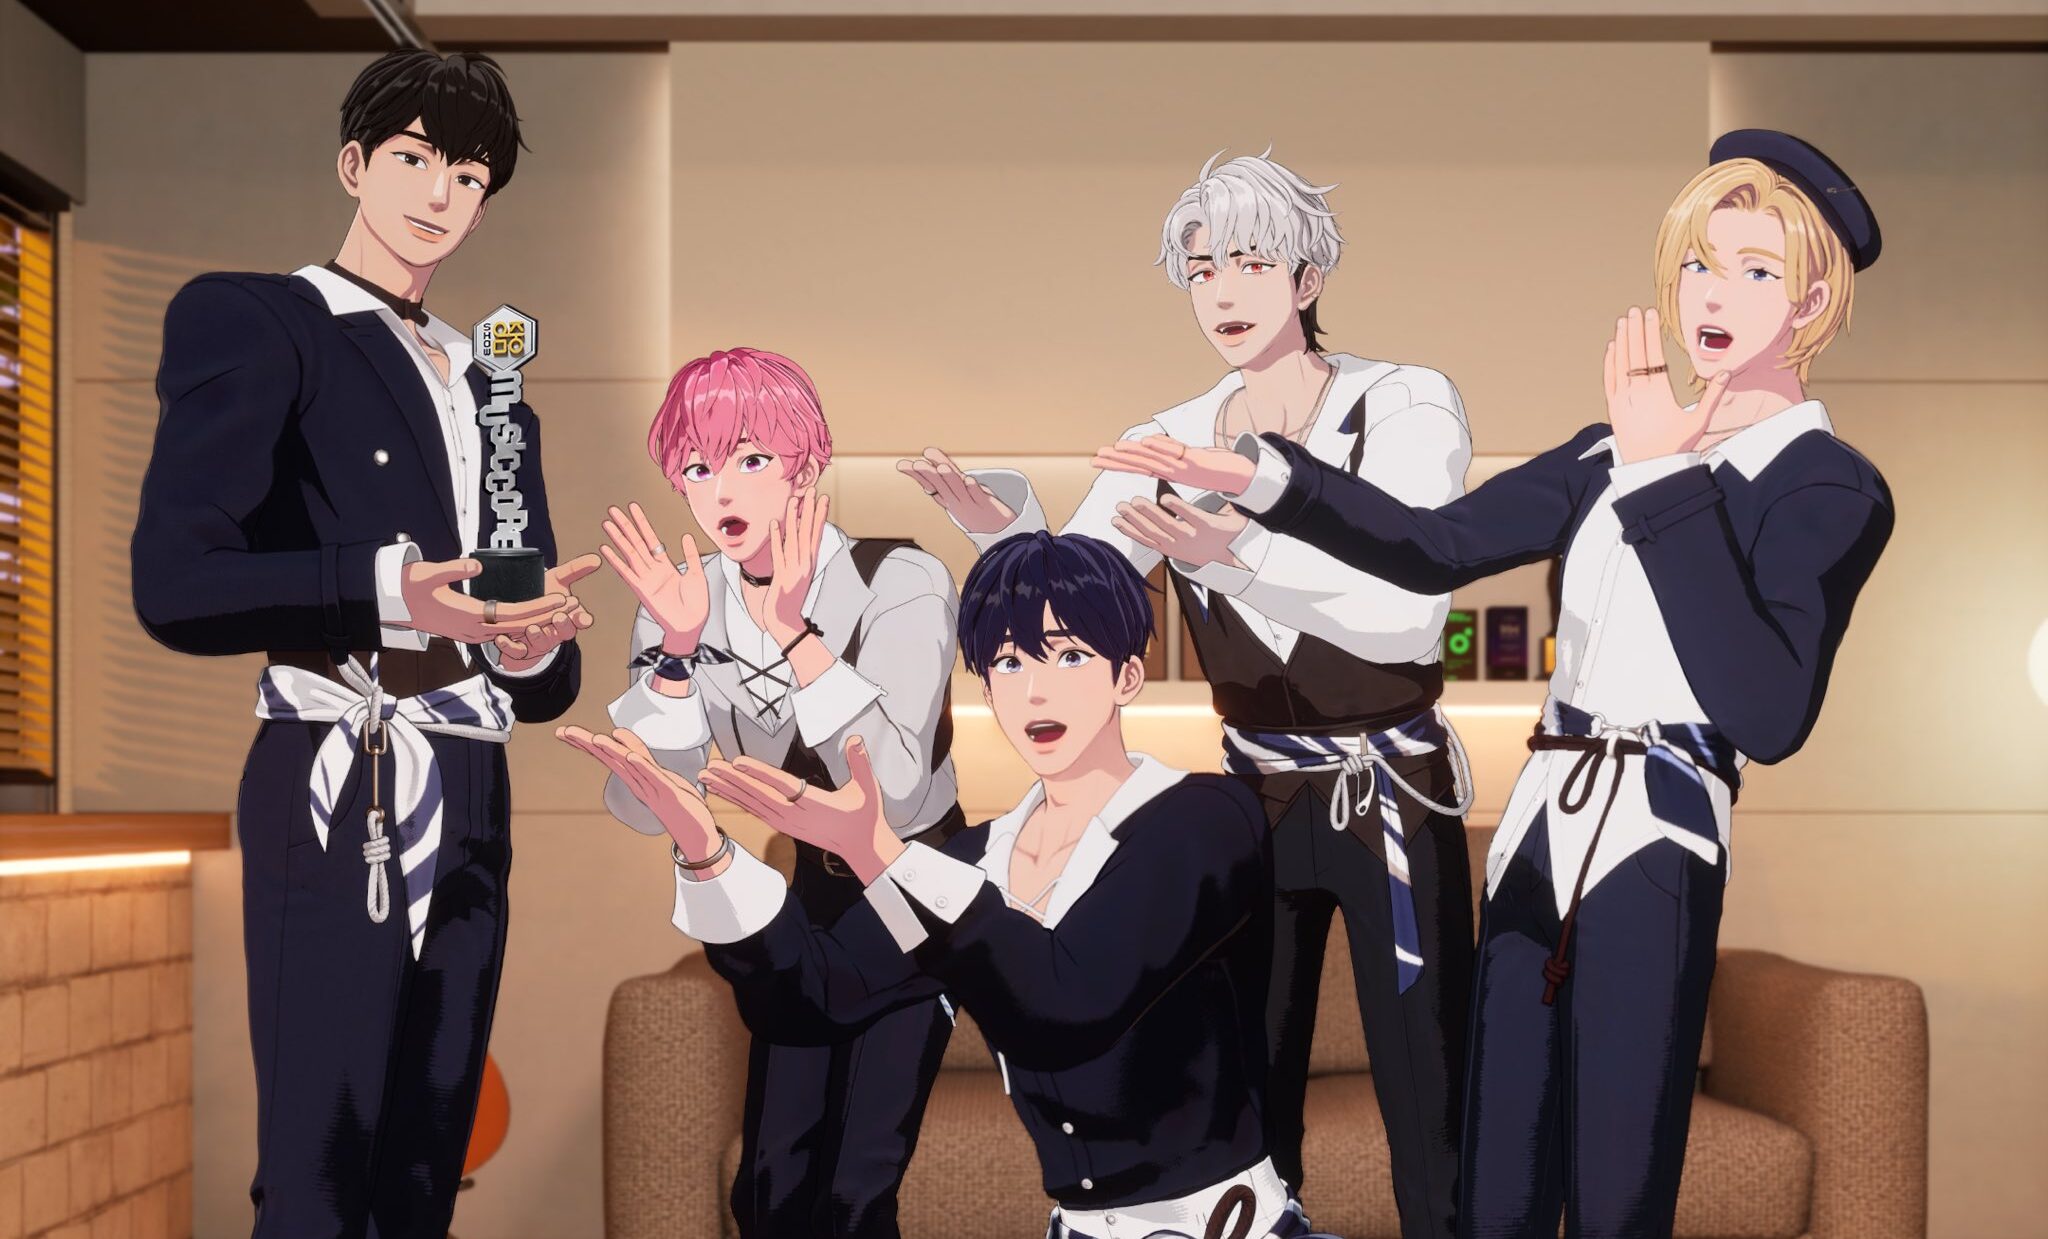 How virtual idol PLAVE became one of the most beloved bands in Korea